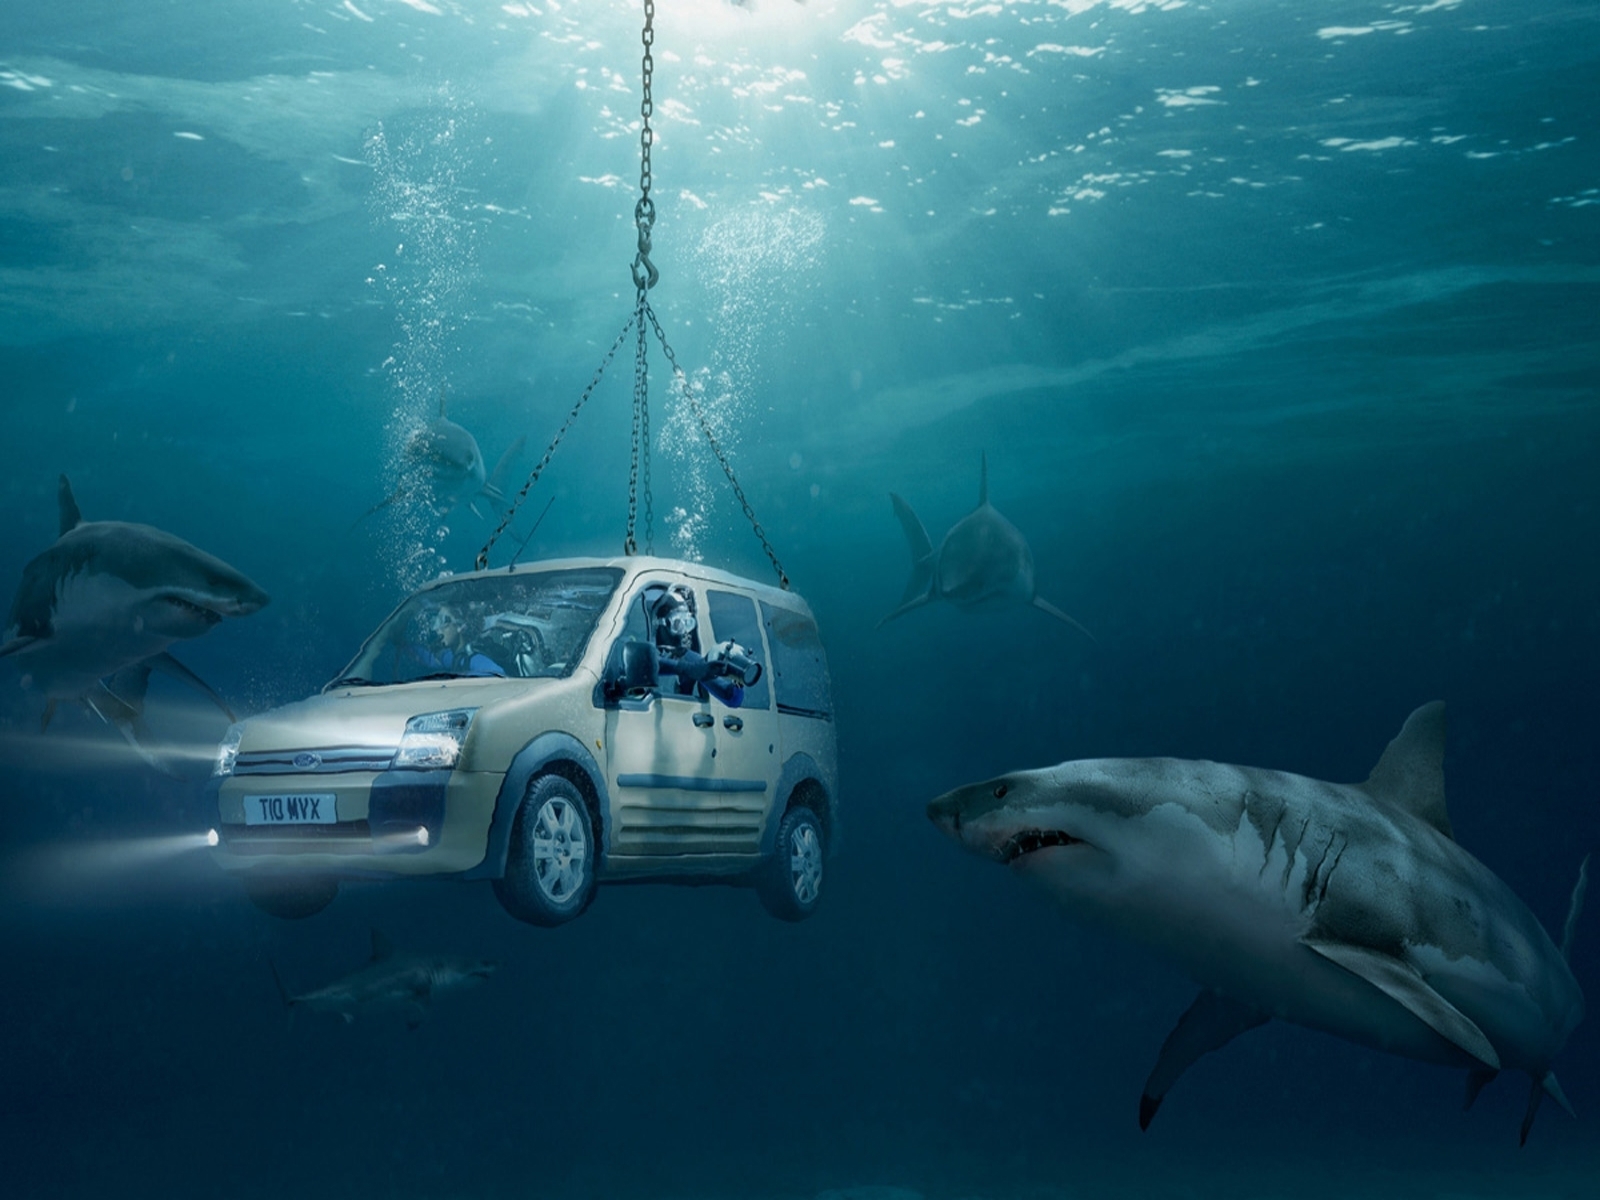 sharks, funny, auto, sea, ford, turquoise